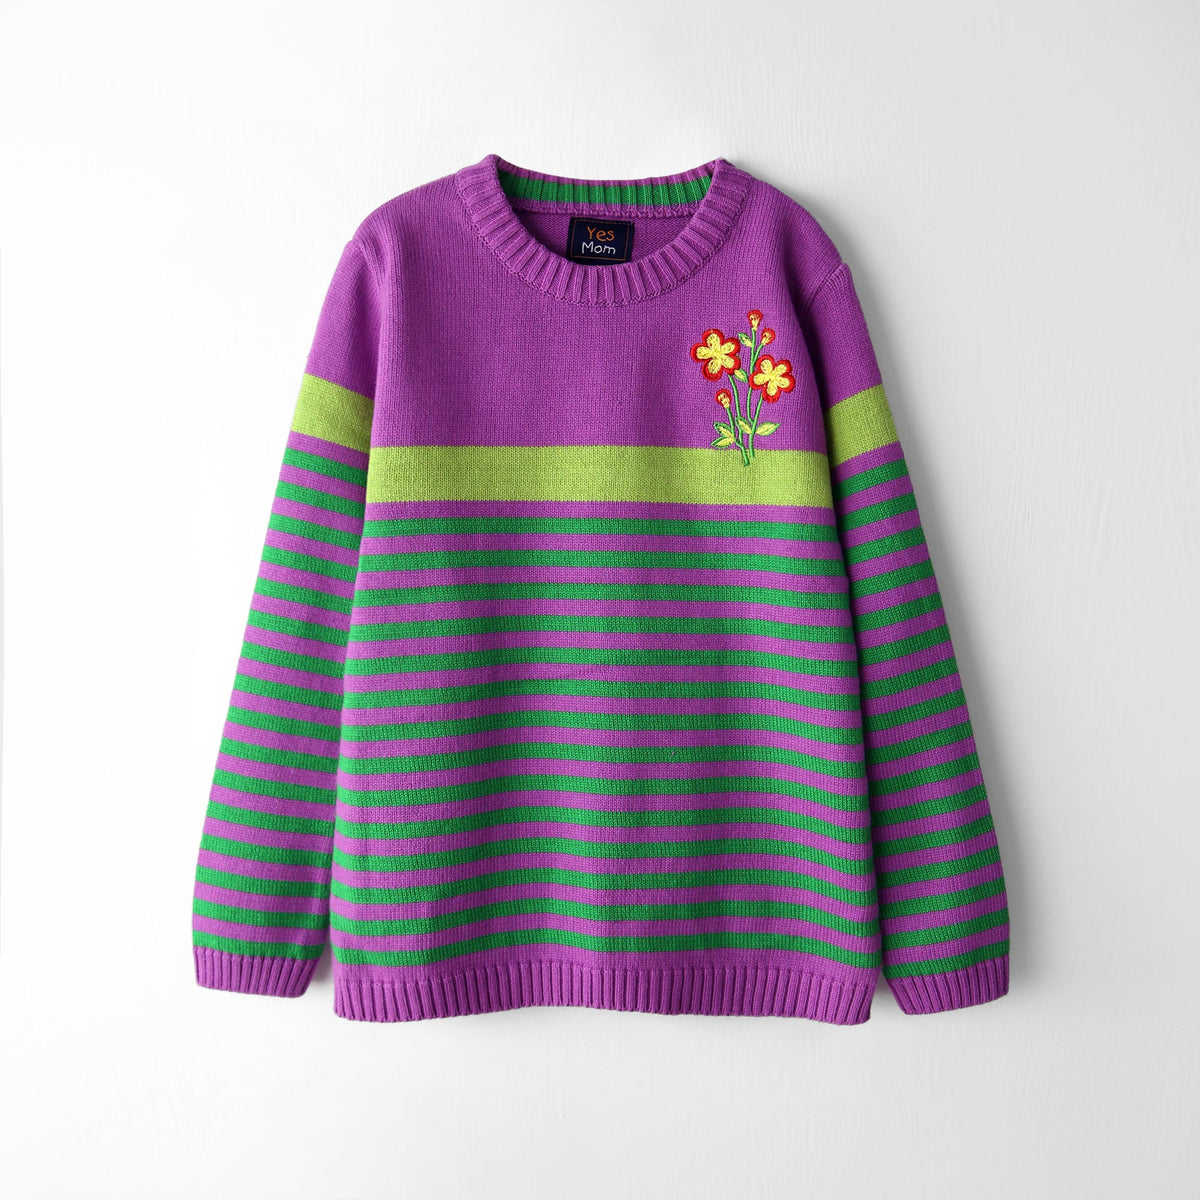 Girls Premium Quality Striped Knit Embroidered Sweater